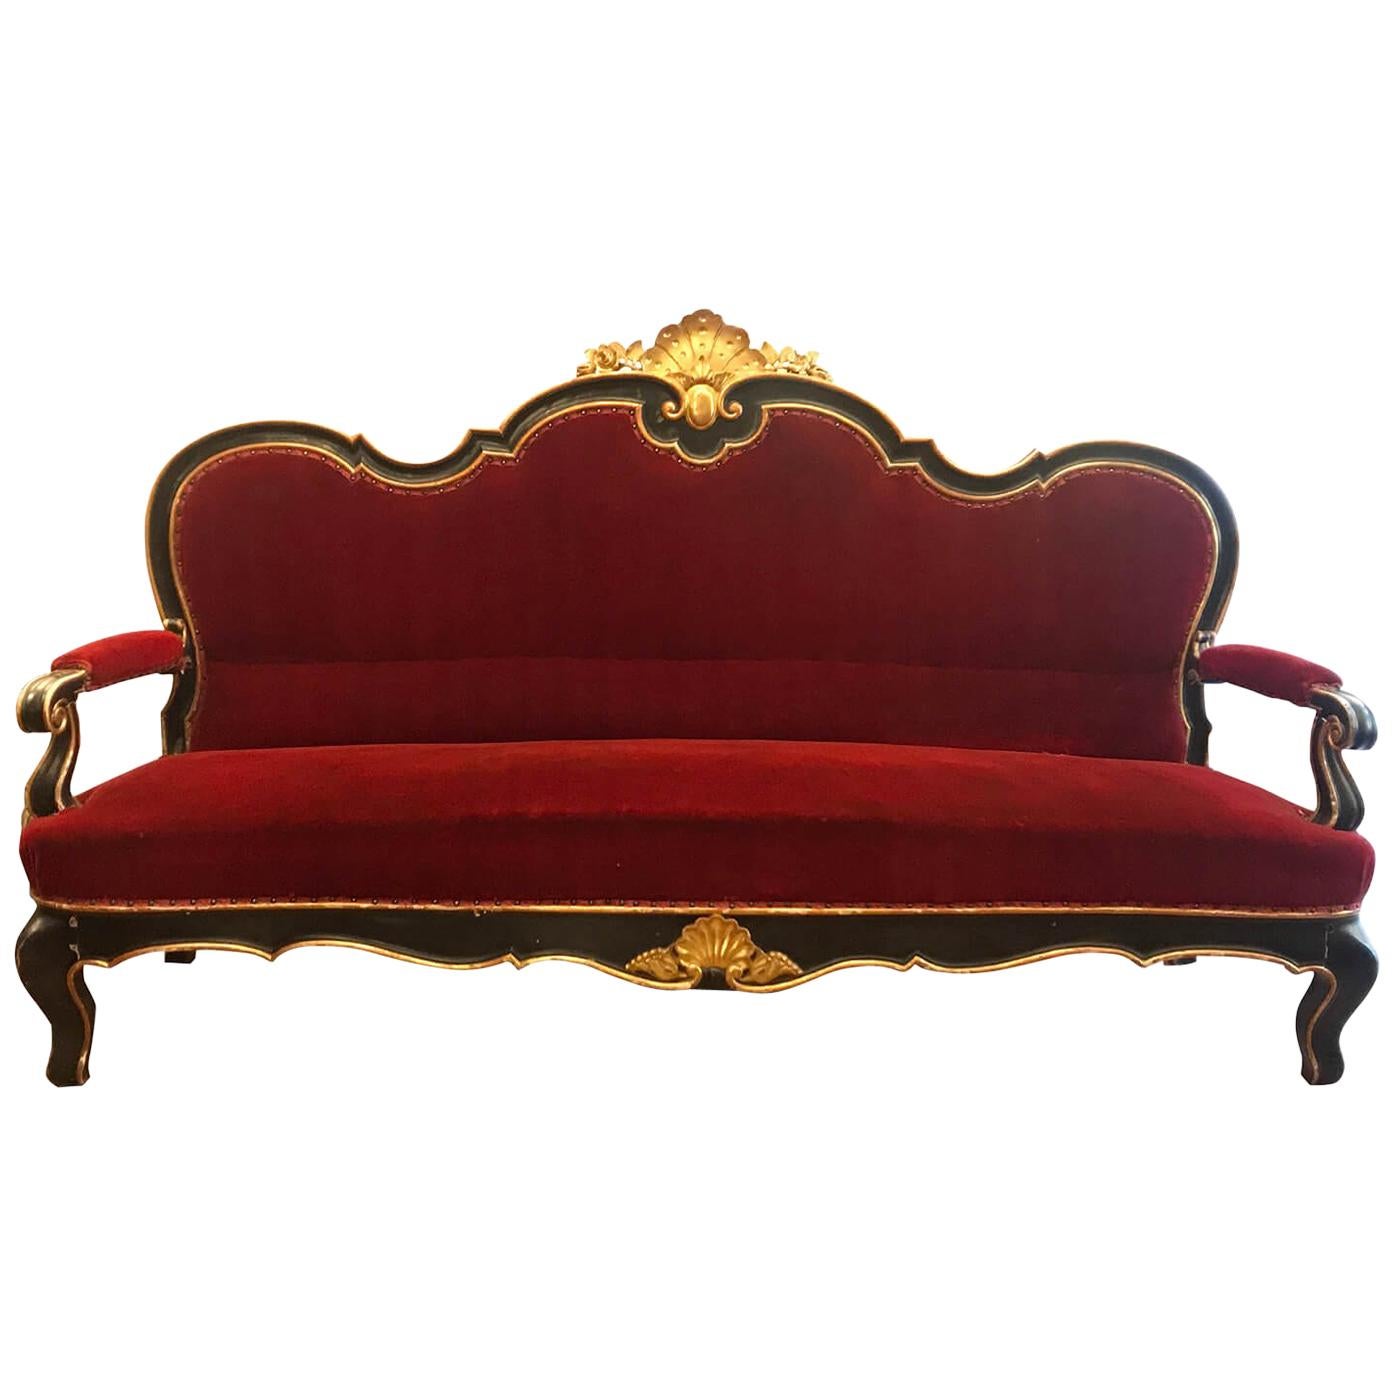 Italian 19th Century Large Sofa Sicilian Canapè with Lacquer Gilding Red Velvet